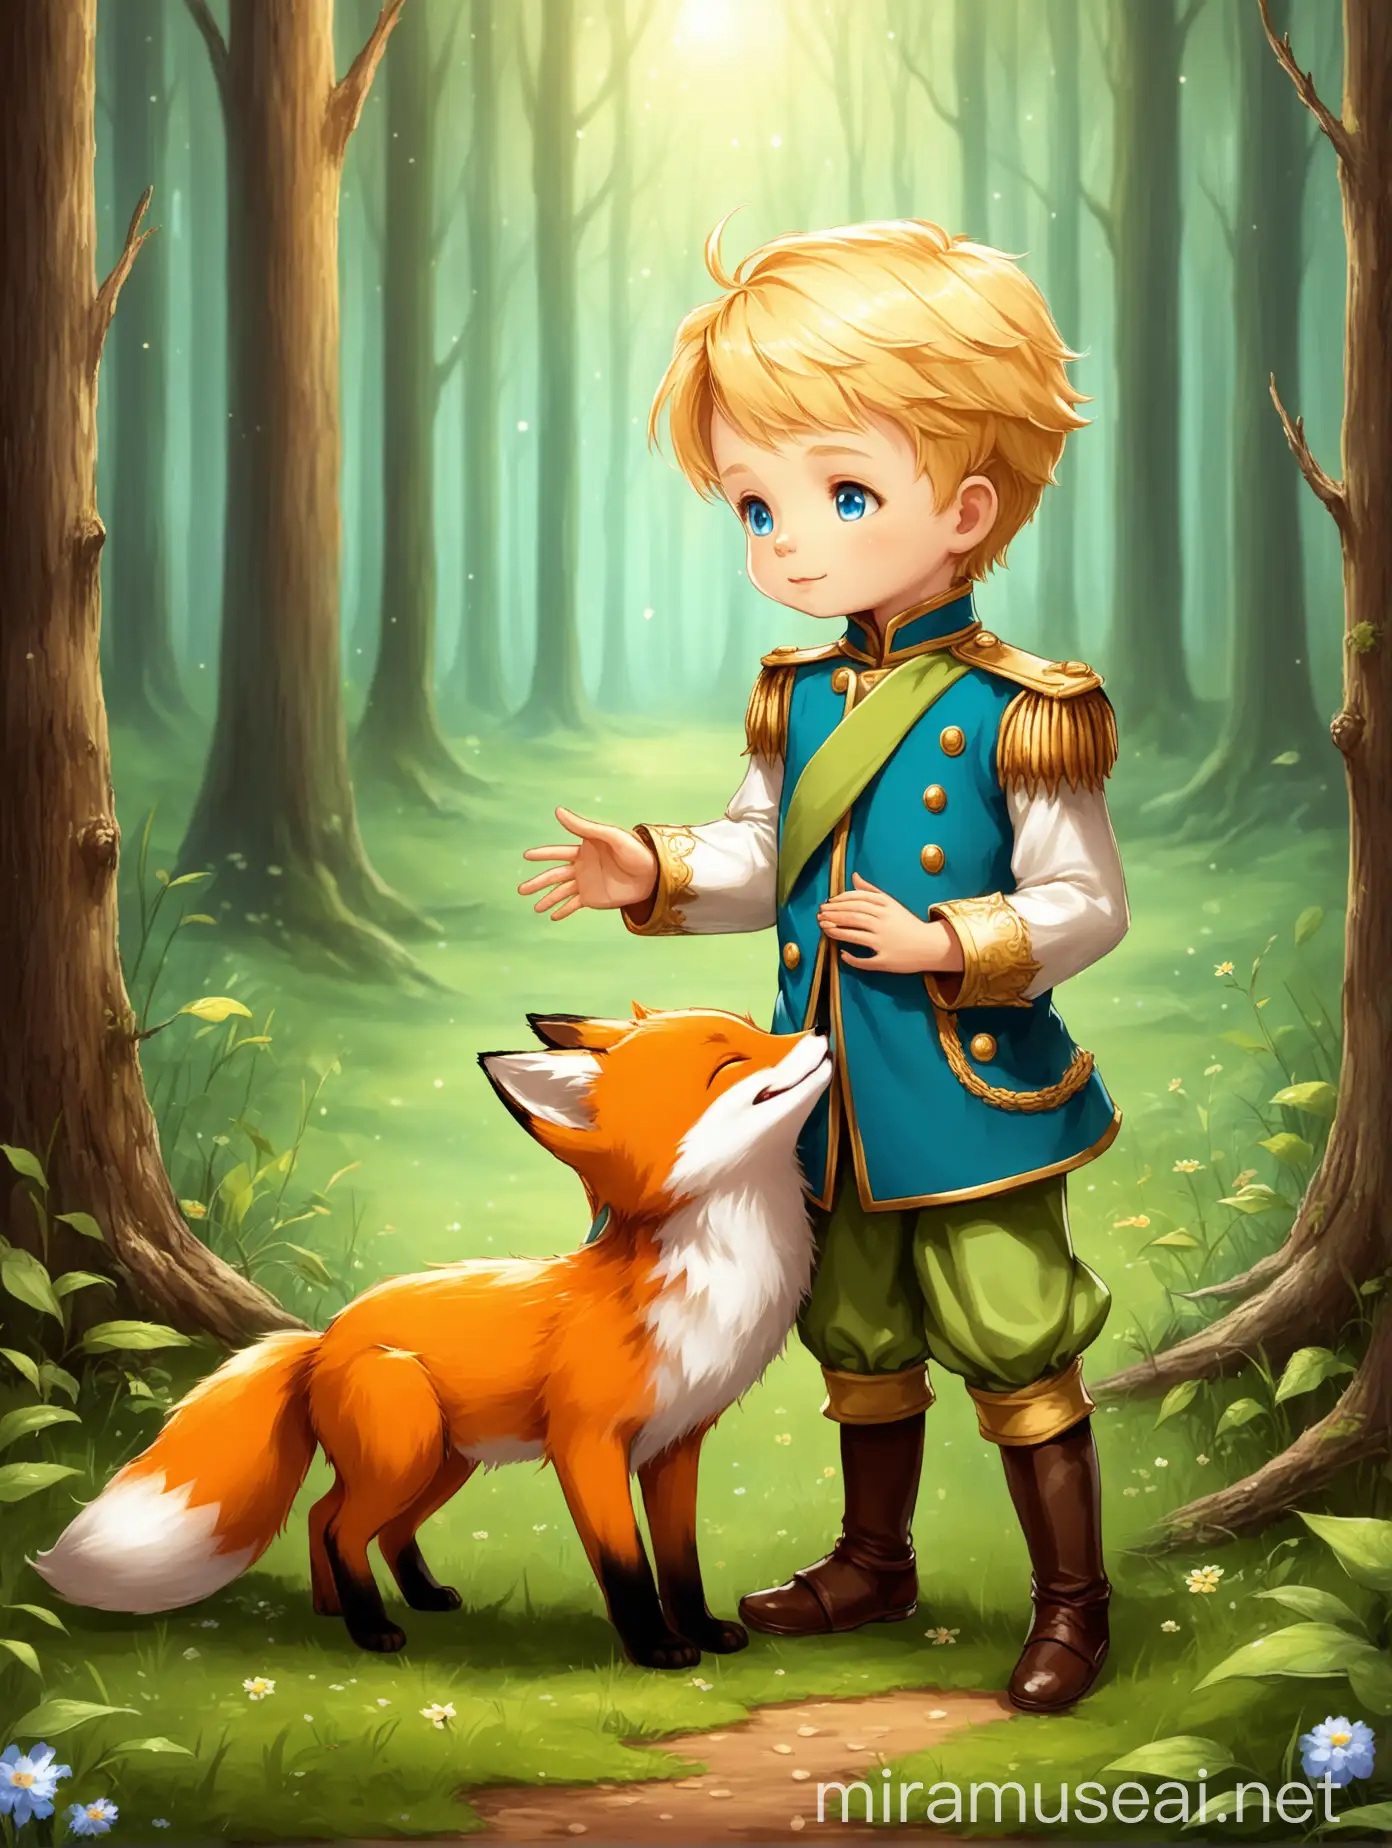 a little prince with his pet fox cub playing in forest

